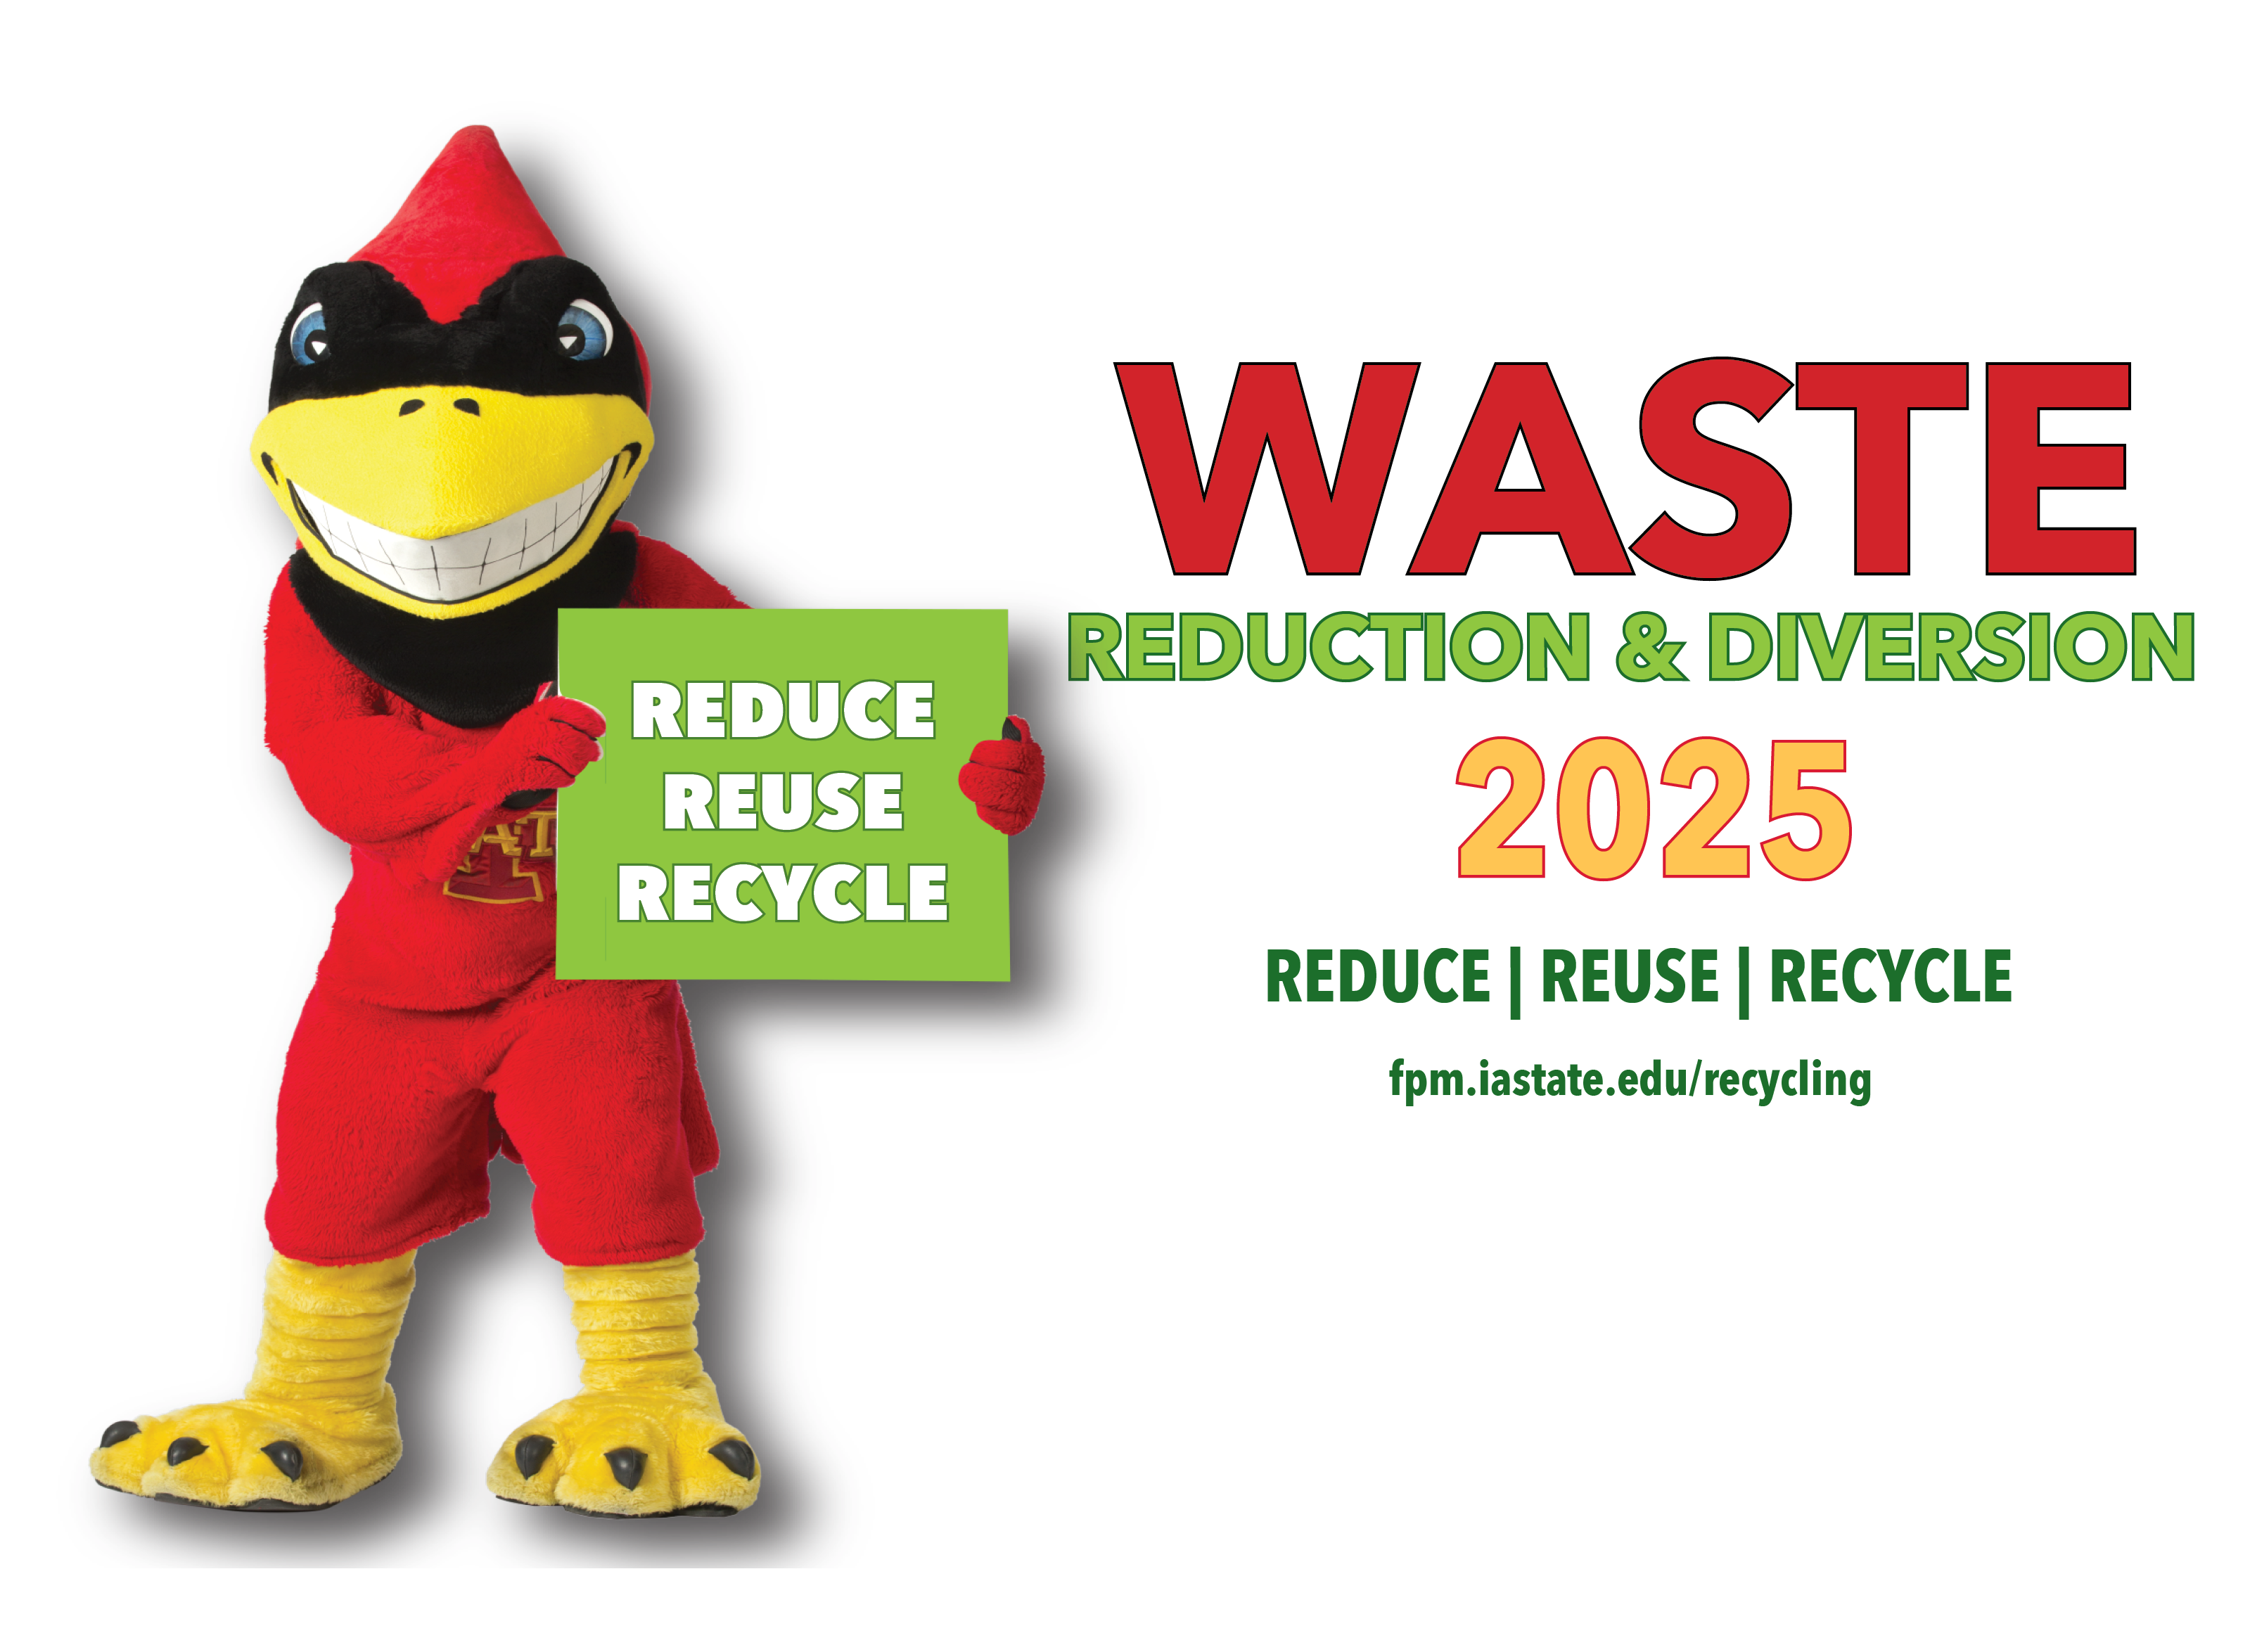 Waste reduction and diversion 2025 - reduce,reuse, recycle